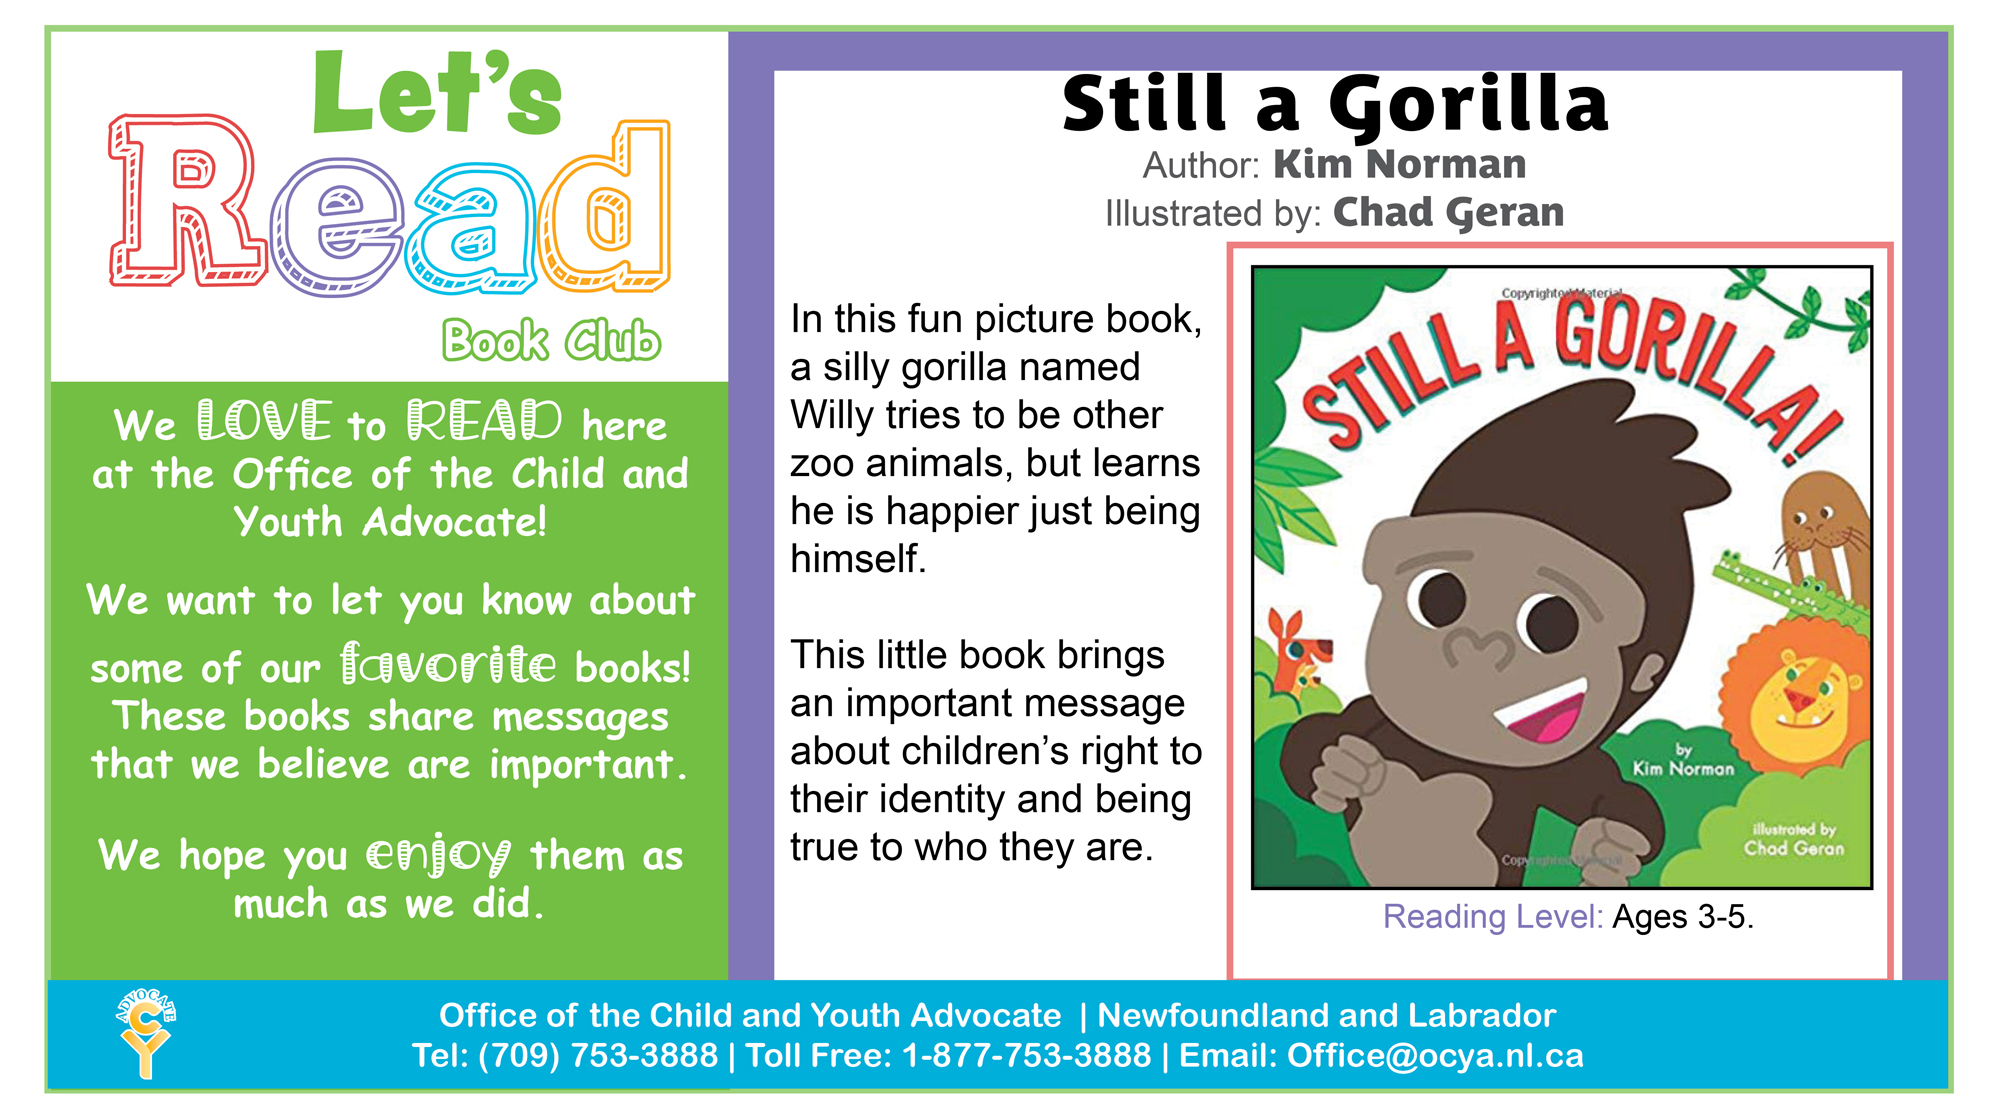 Still A Gorilla, by Kim Norman. In this fun picture book, a silly gorilla named Willy tries to be other zoo animals, but learns he is happier just being himself. This little book brings an important message about children's right to their and being true to who they are. Reading Level: Ages 3-5.